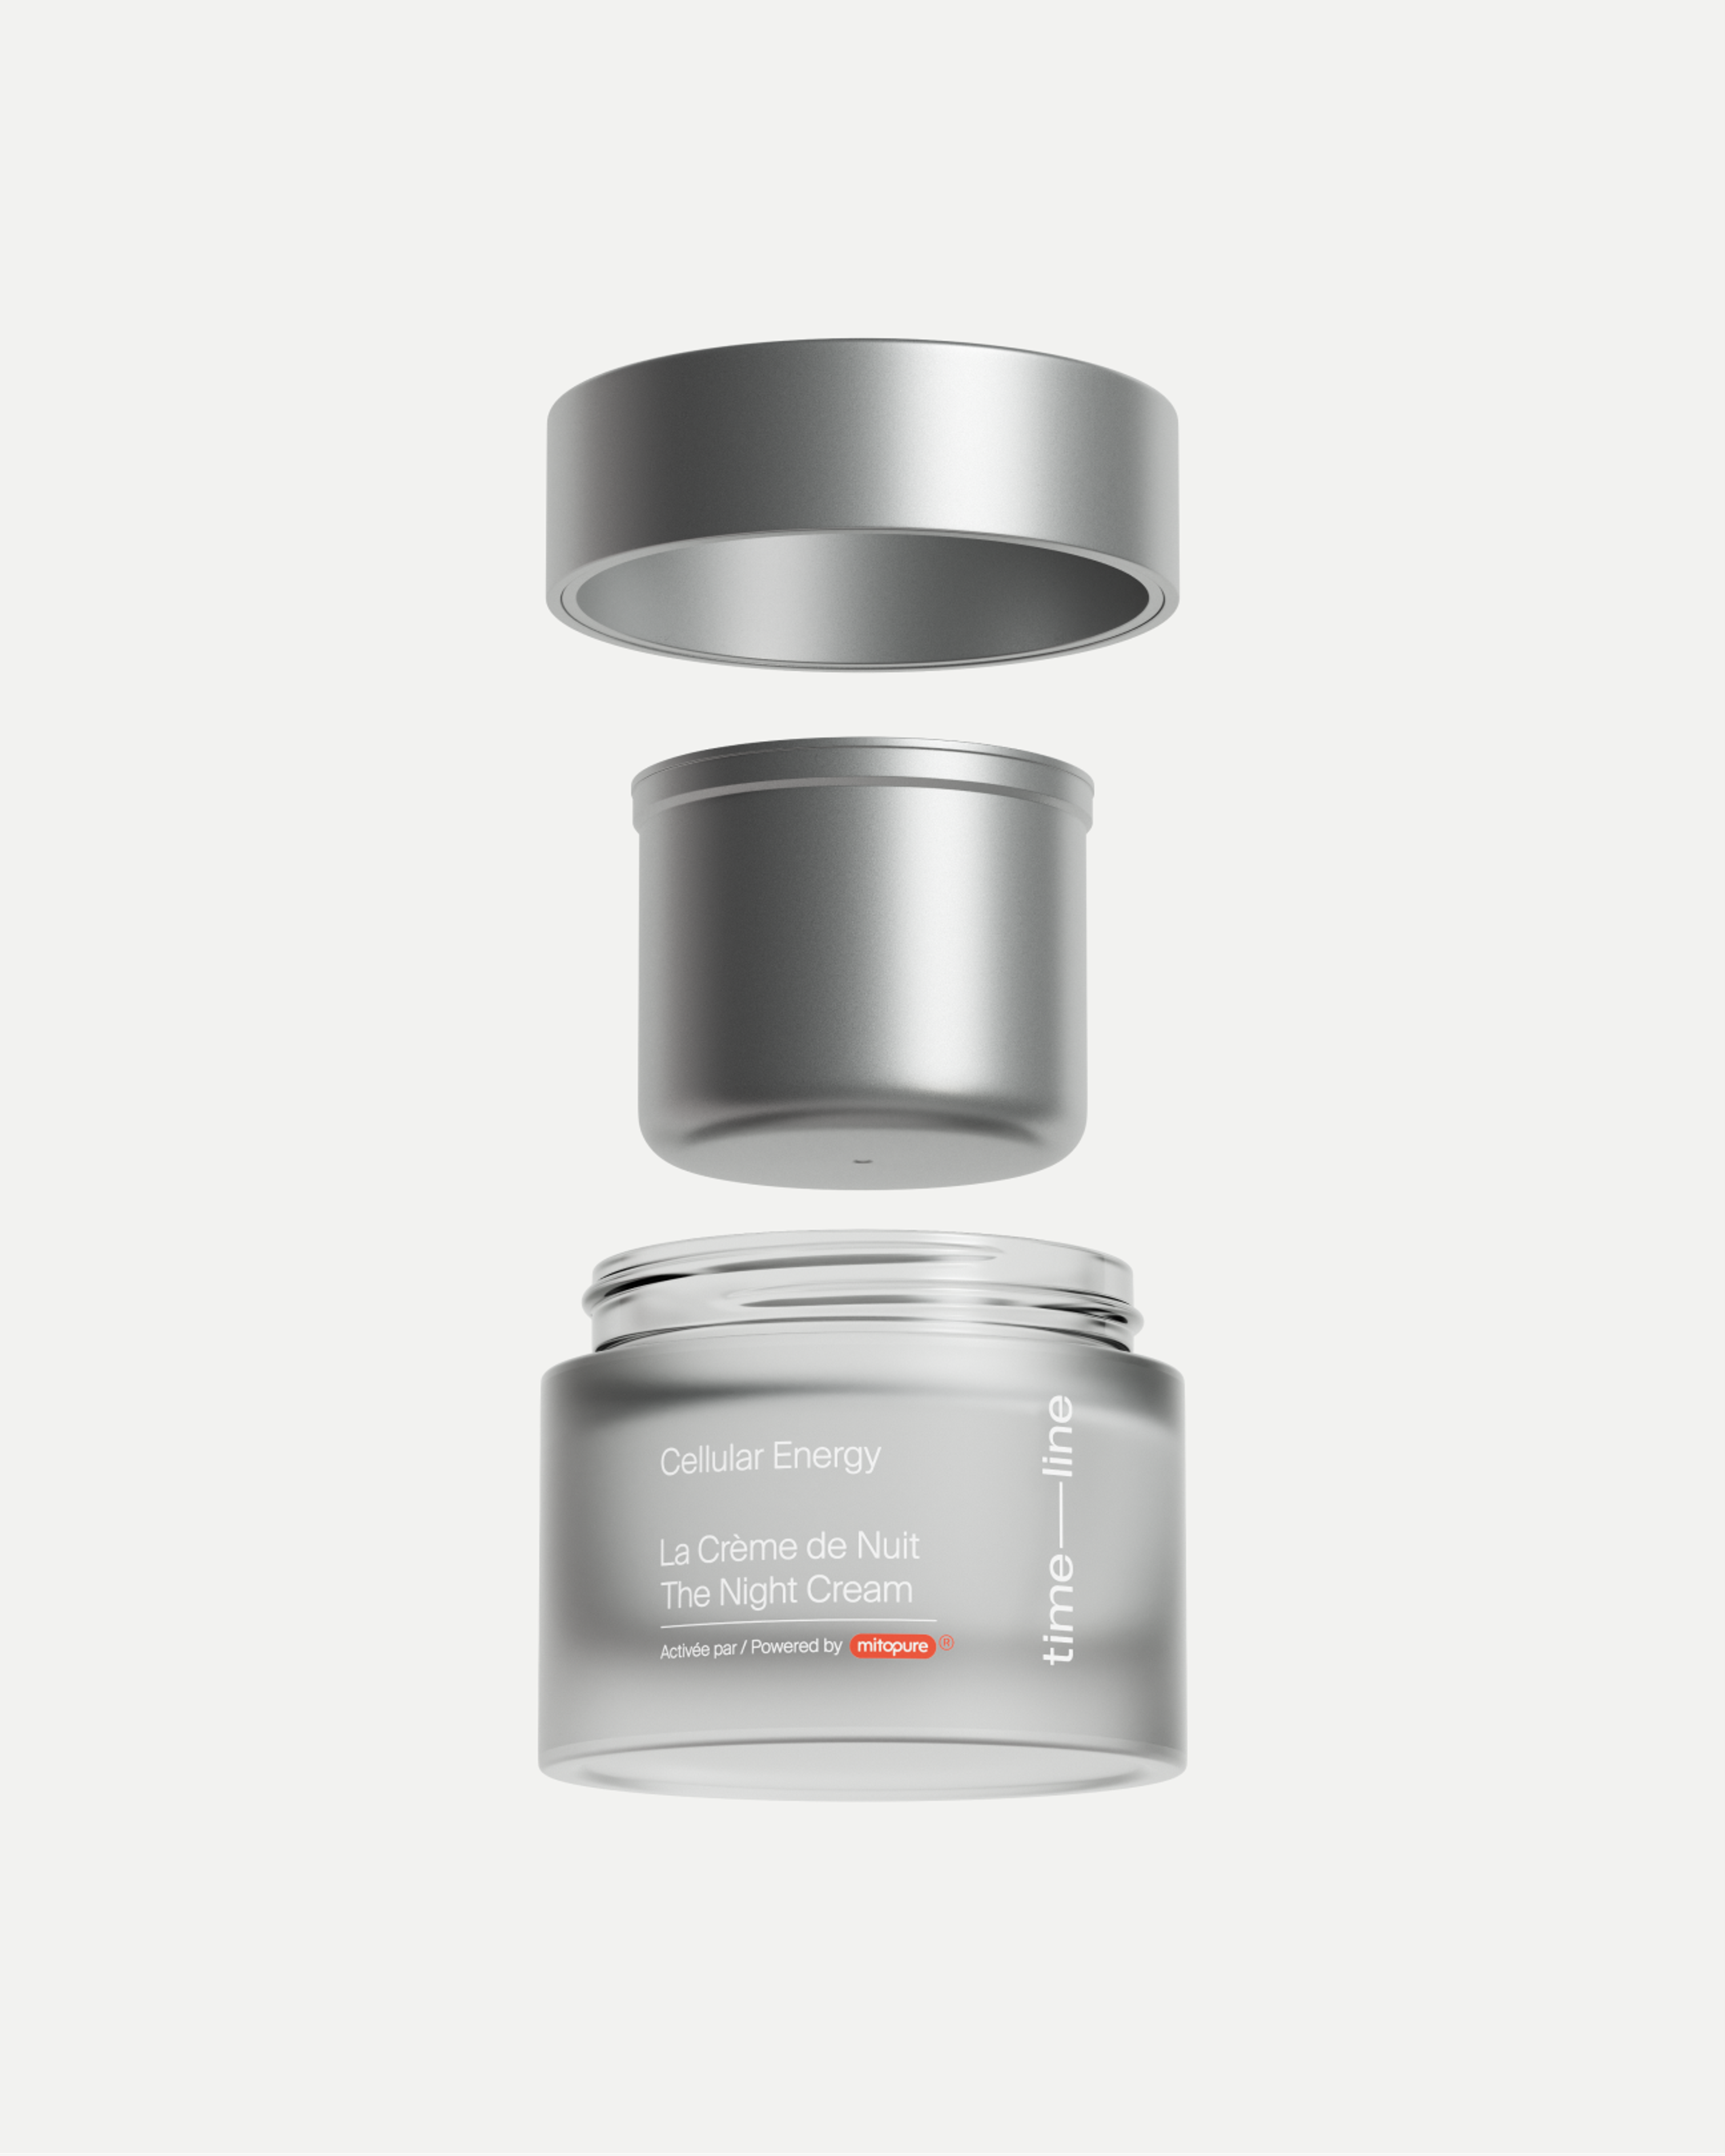 The Night Cream refillable packaging